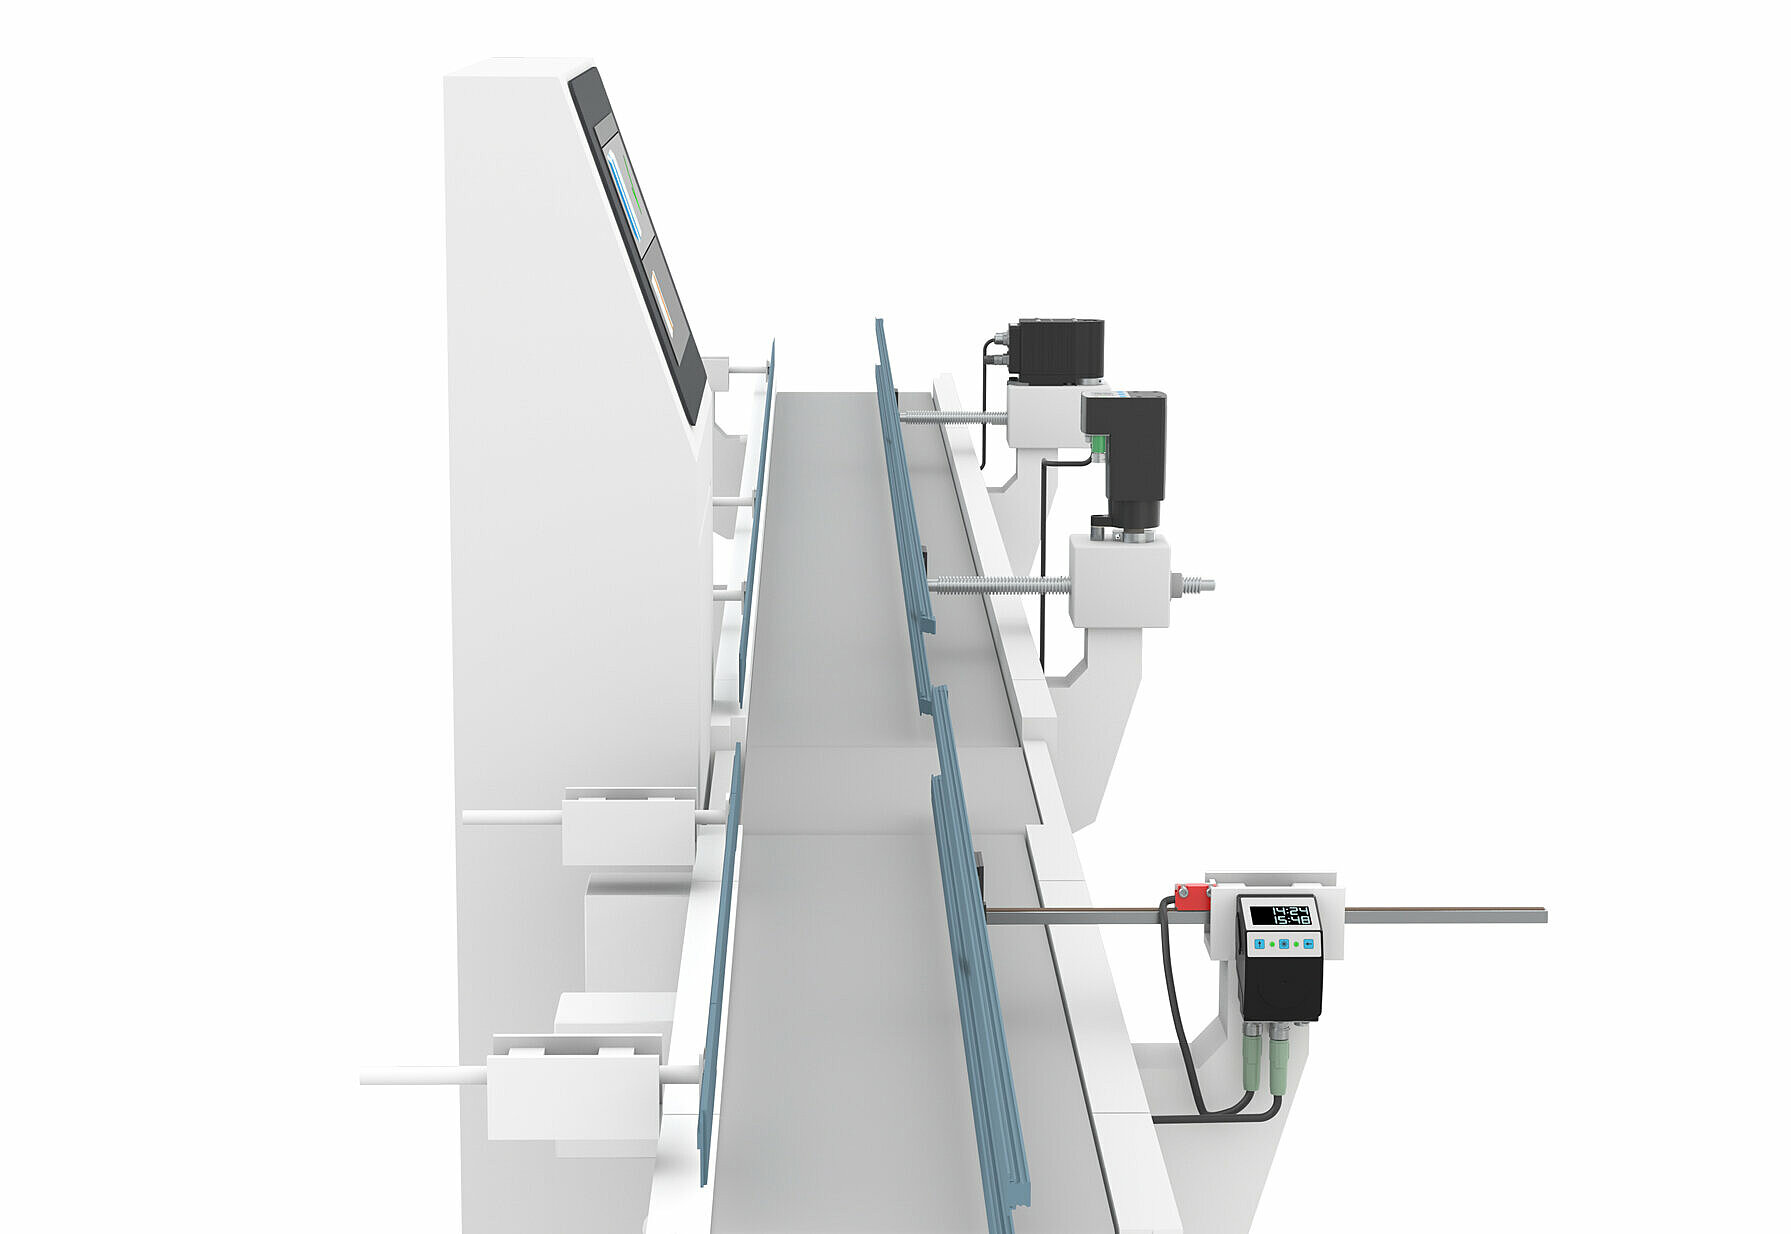 SIKO positioning systems for side guides and conveyor belts without icons